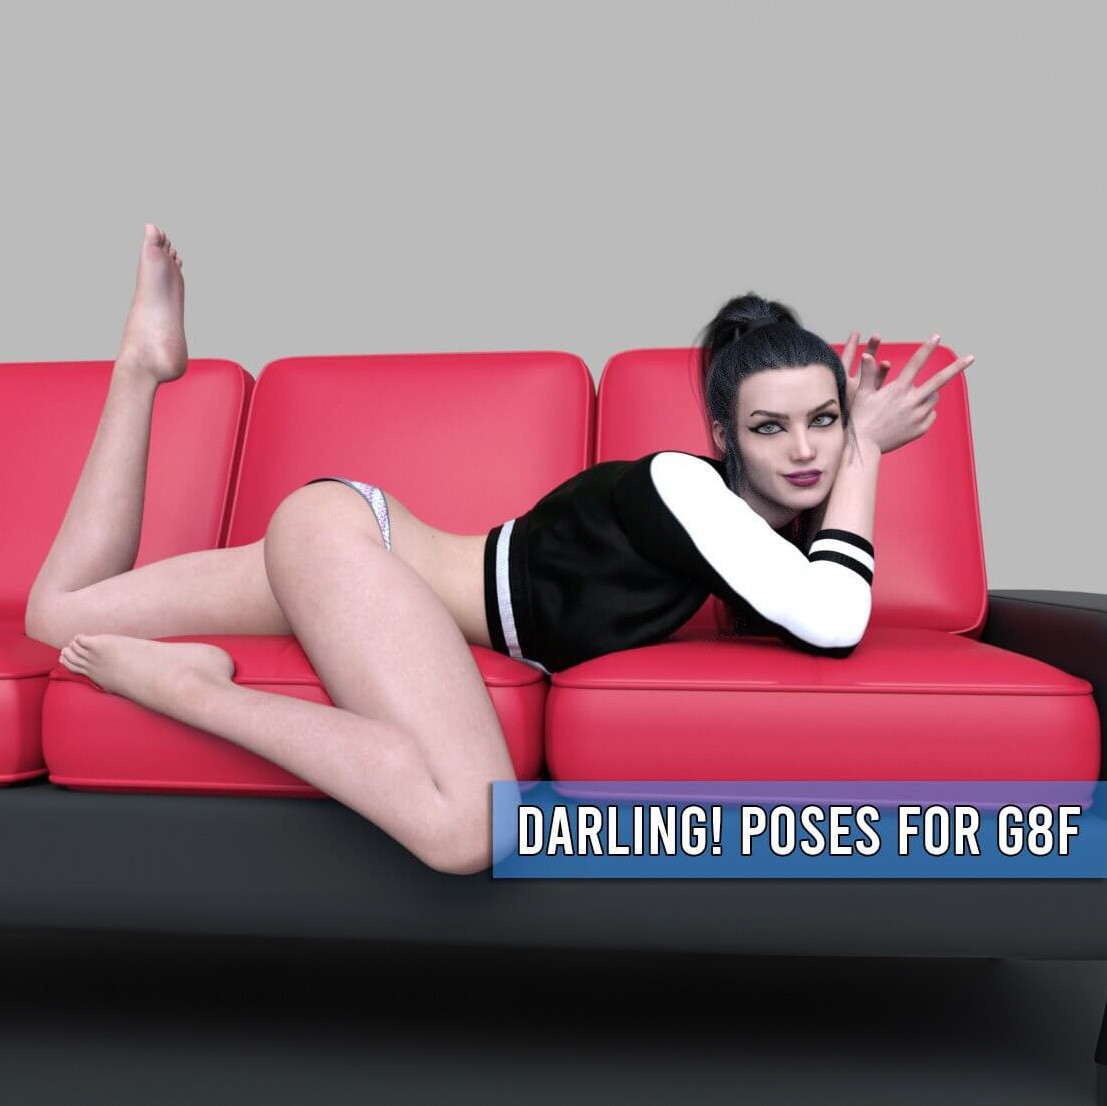 darling poses for genesis 8 female 04a1fbac147d9f58725